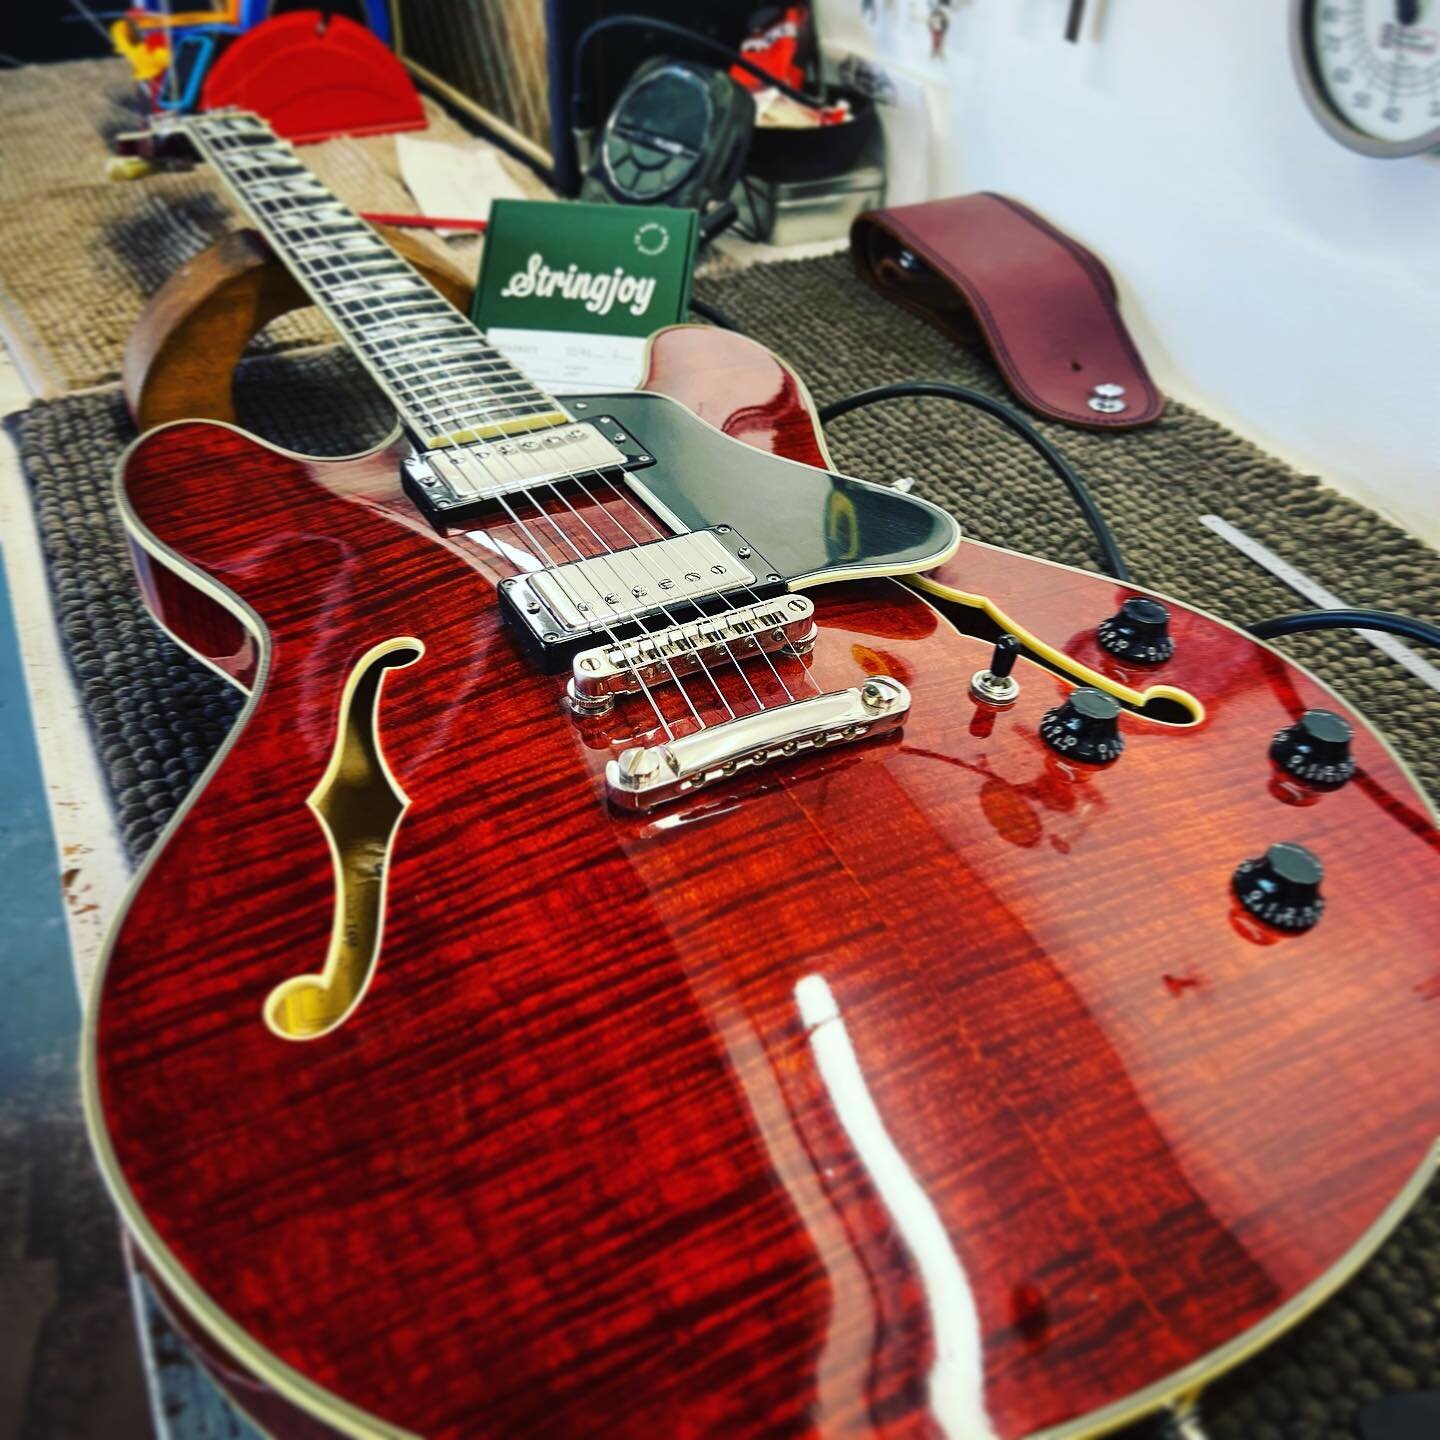 A little fretwork and fresh set of @stringjoy strings #broadways on this @eastmanguitars 335. I must admit that the quality of those guitars are rather amazing at the price point&hellip; And the #stringjoystrings - it&rsquo;s been sometime since we h